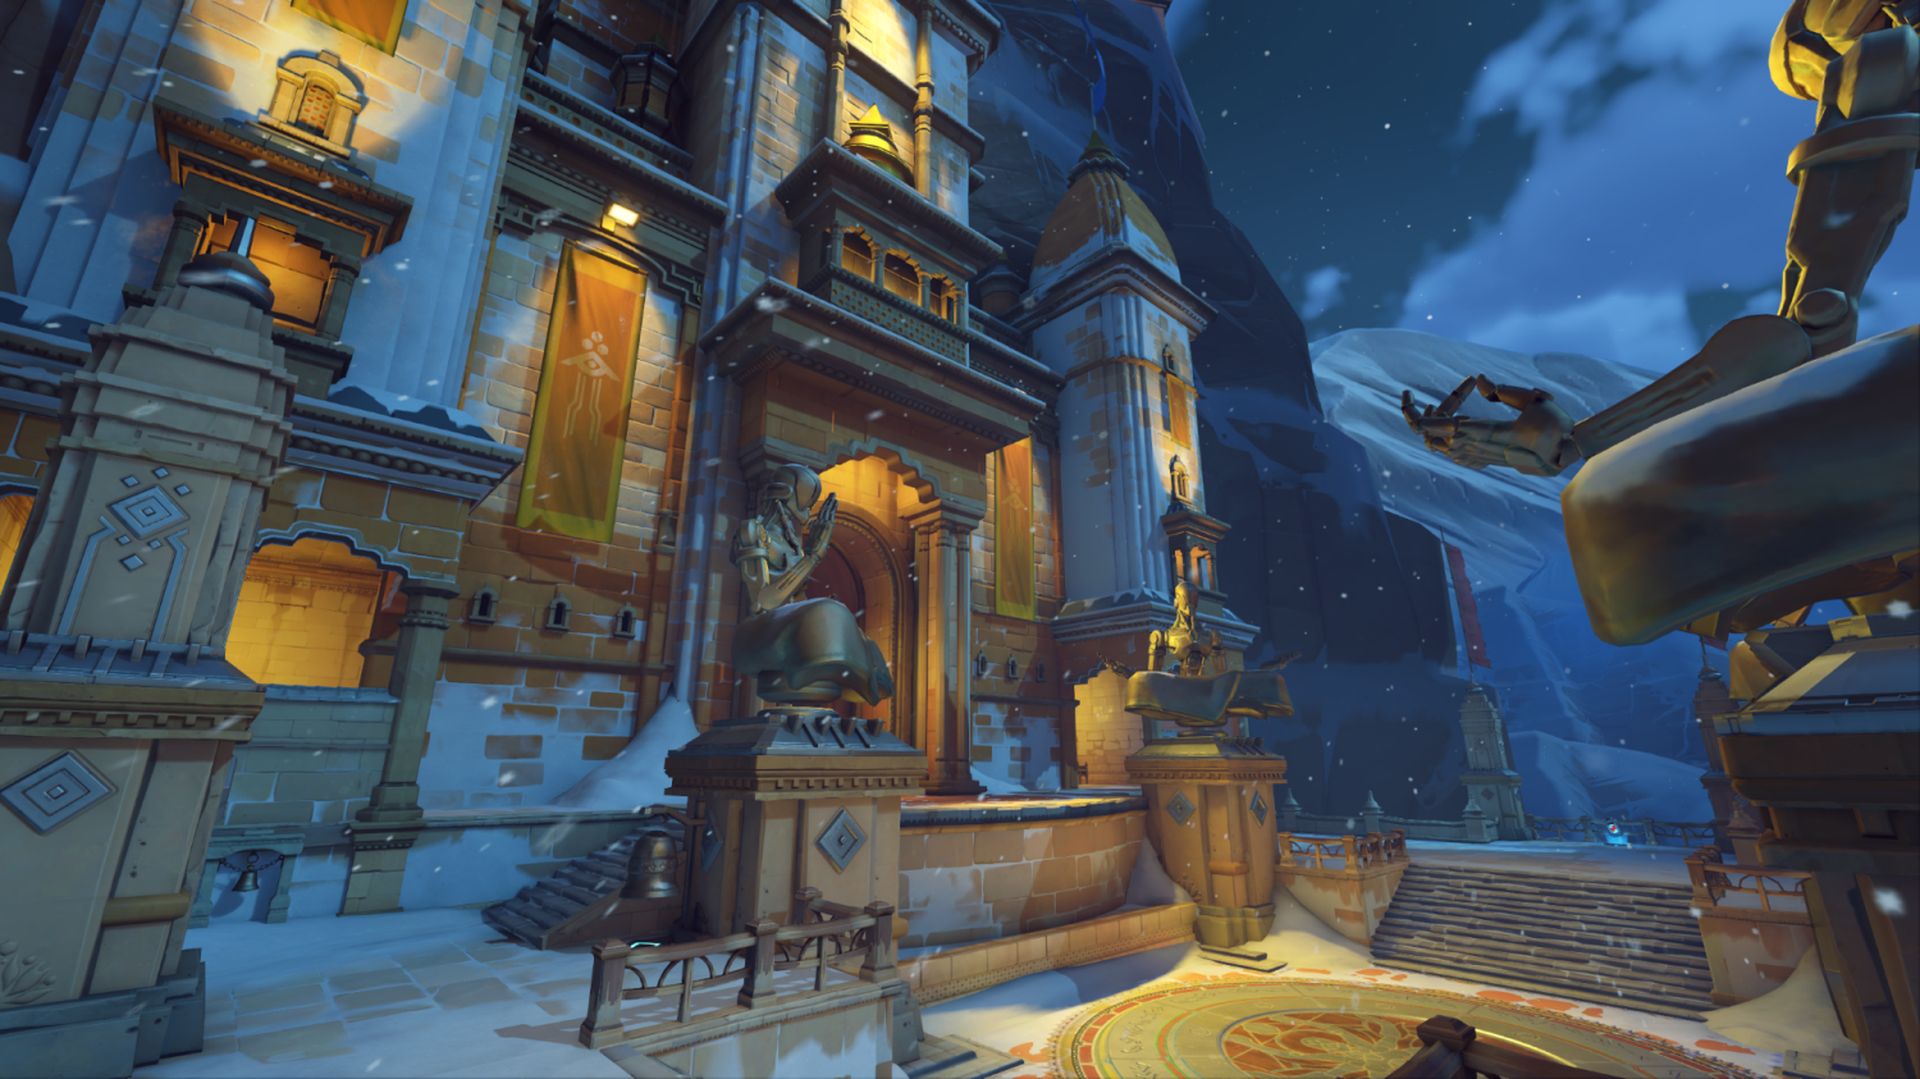 We are on the verge of getting our hands on the update for the game, and today, we'll cover Overwatch 2 season 2 balance changes and new content that will be...